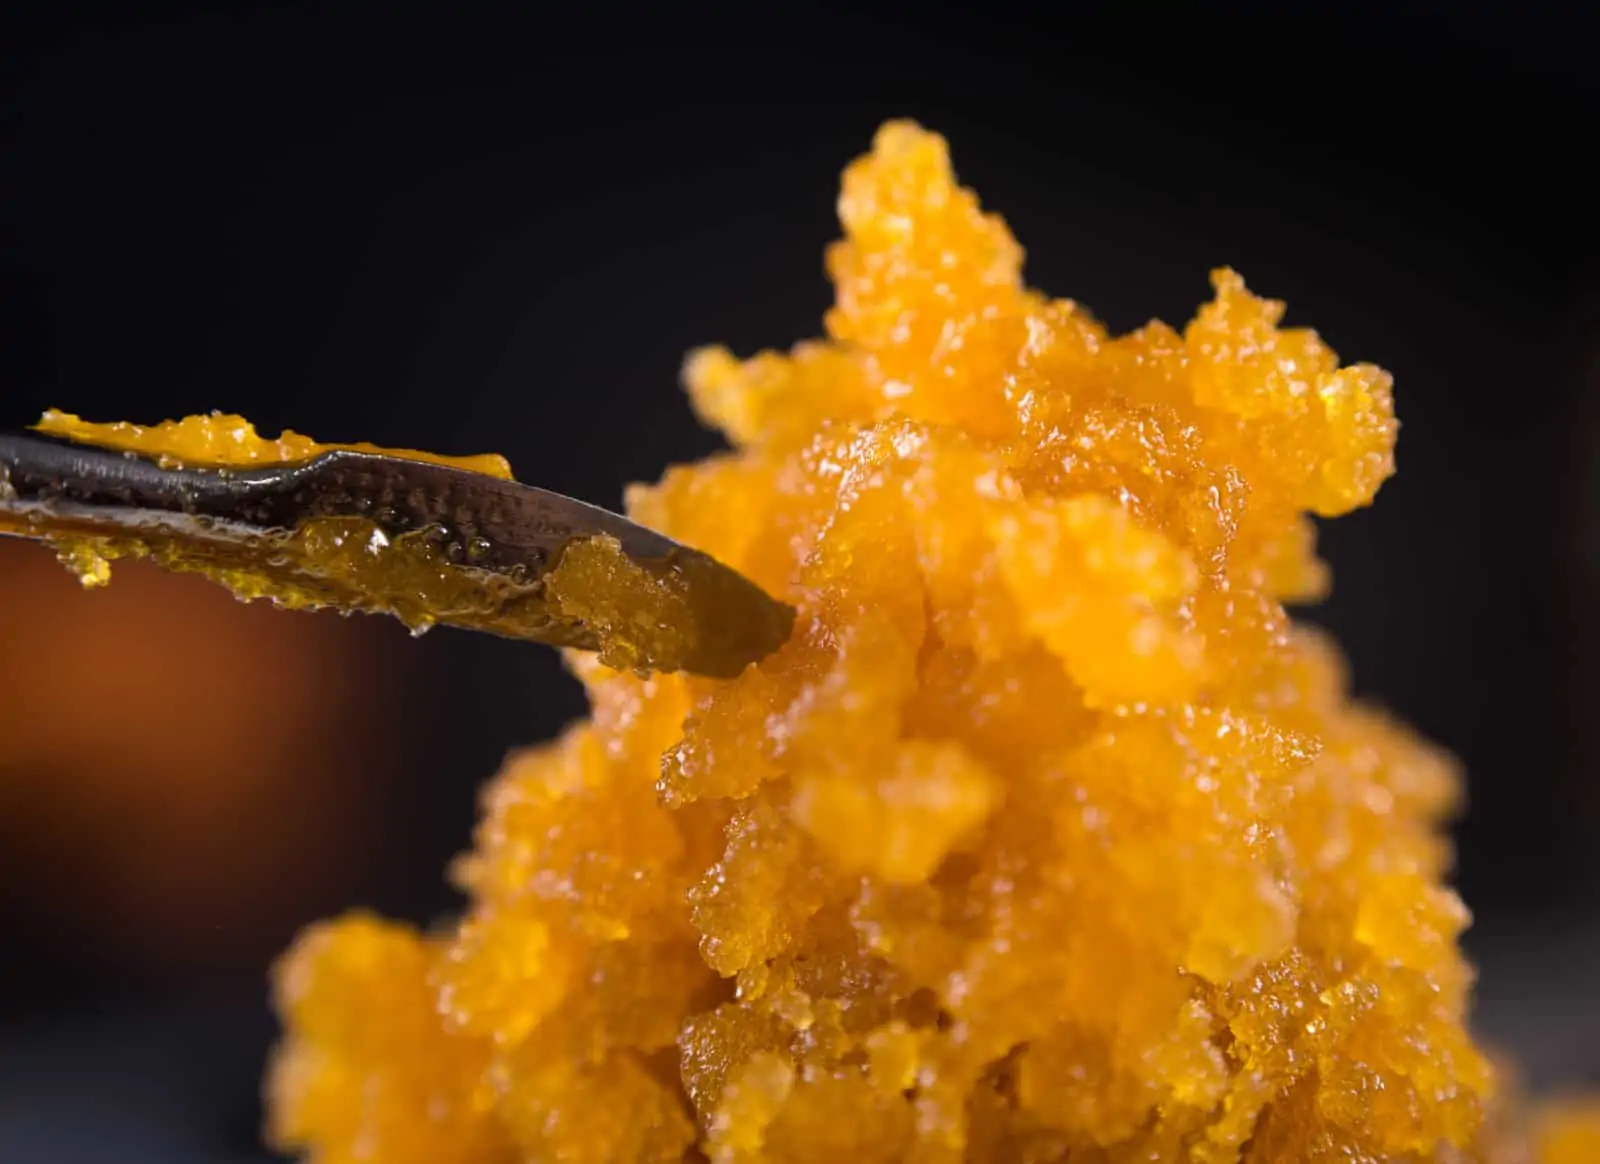 The 10 Best Strains For Concentrates